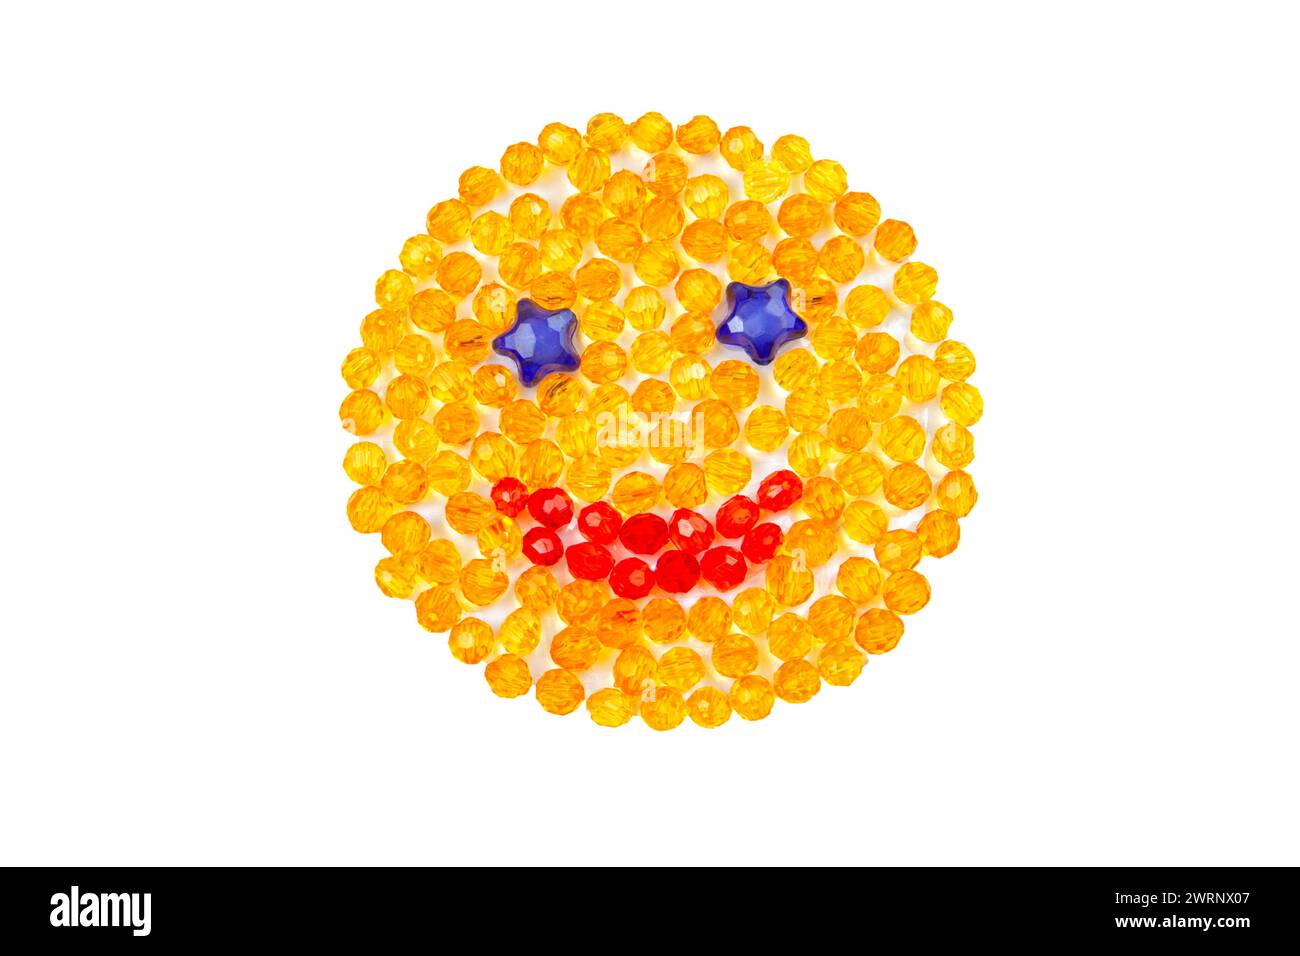 Smiling yellow smiley with beads on a white background. top view. Stock Photo